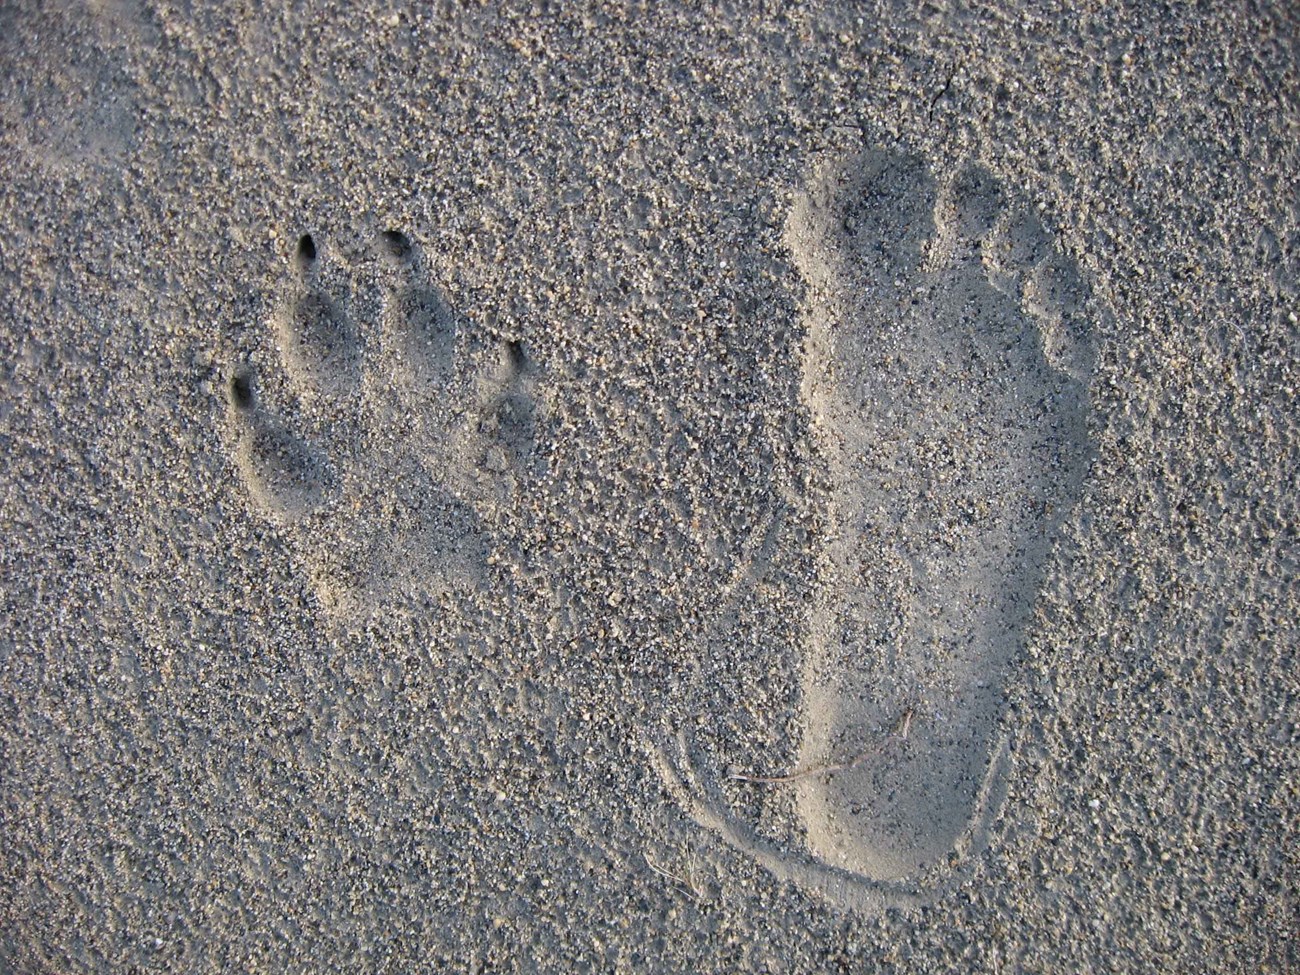 Two footprints in sand:  a coyote print and a human print